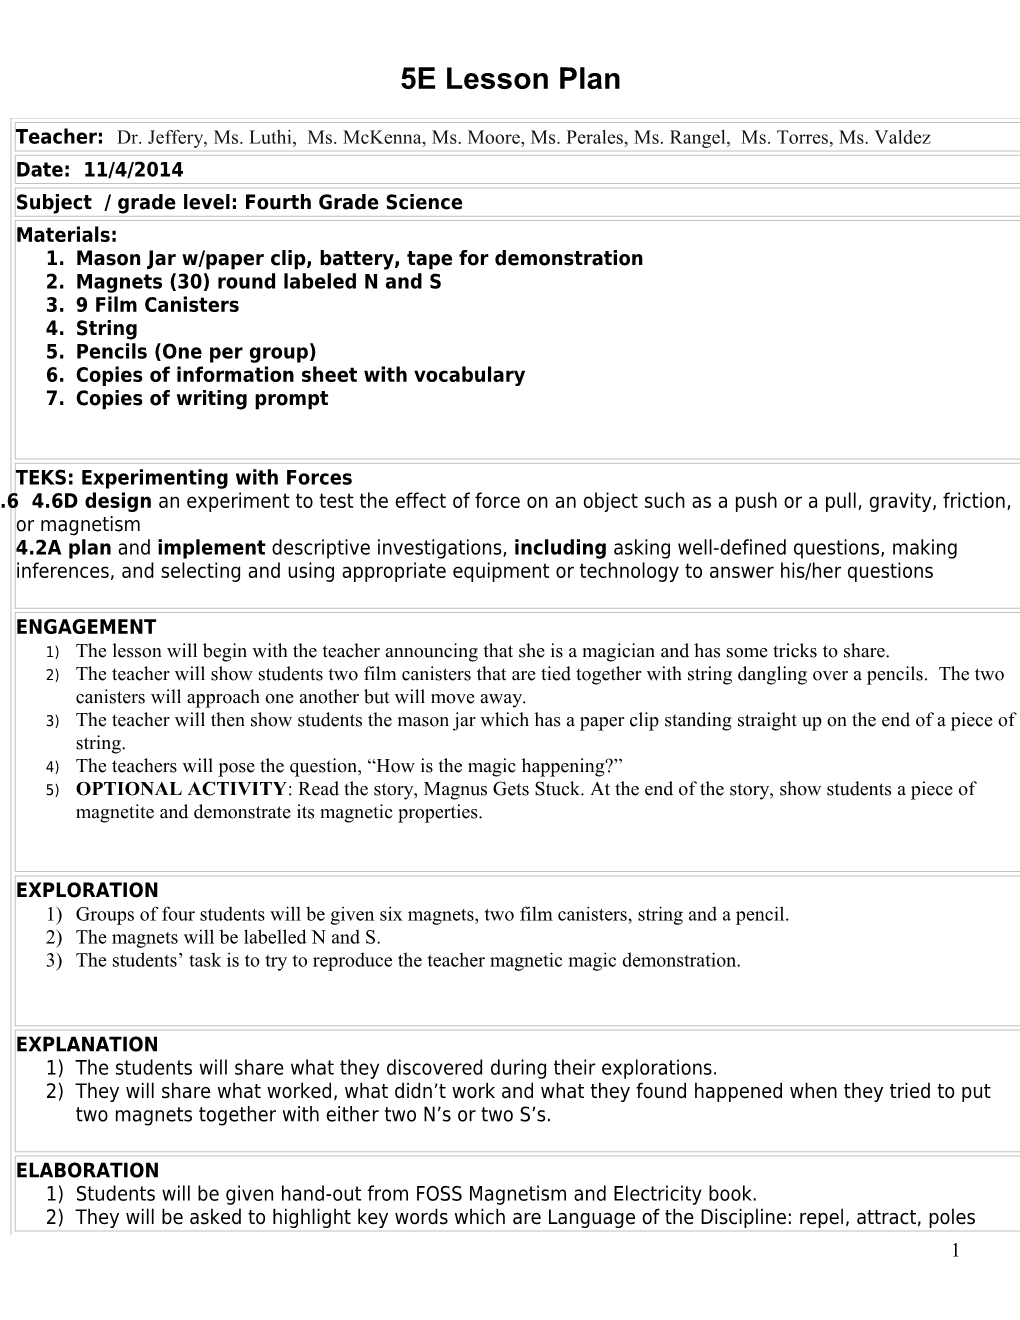 5E Student Lesson Planning Template s1